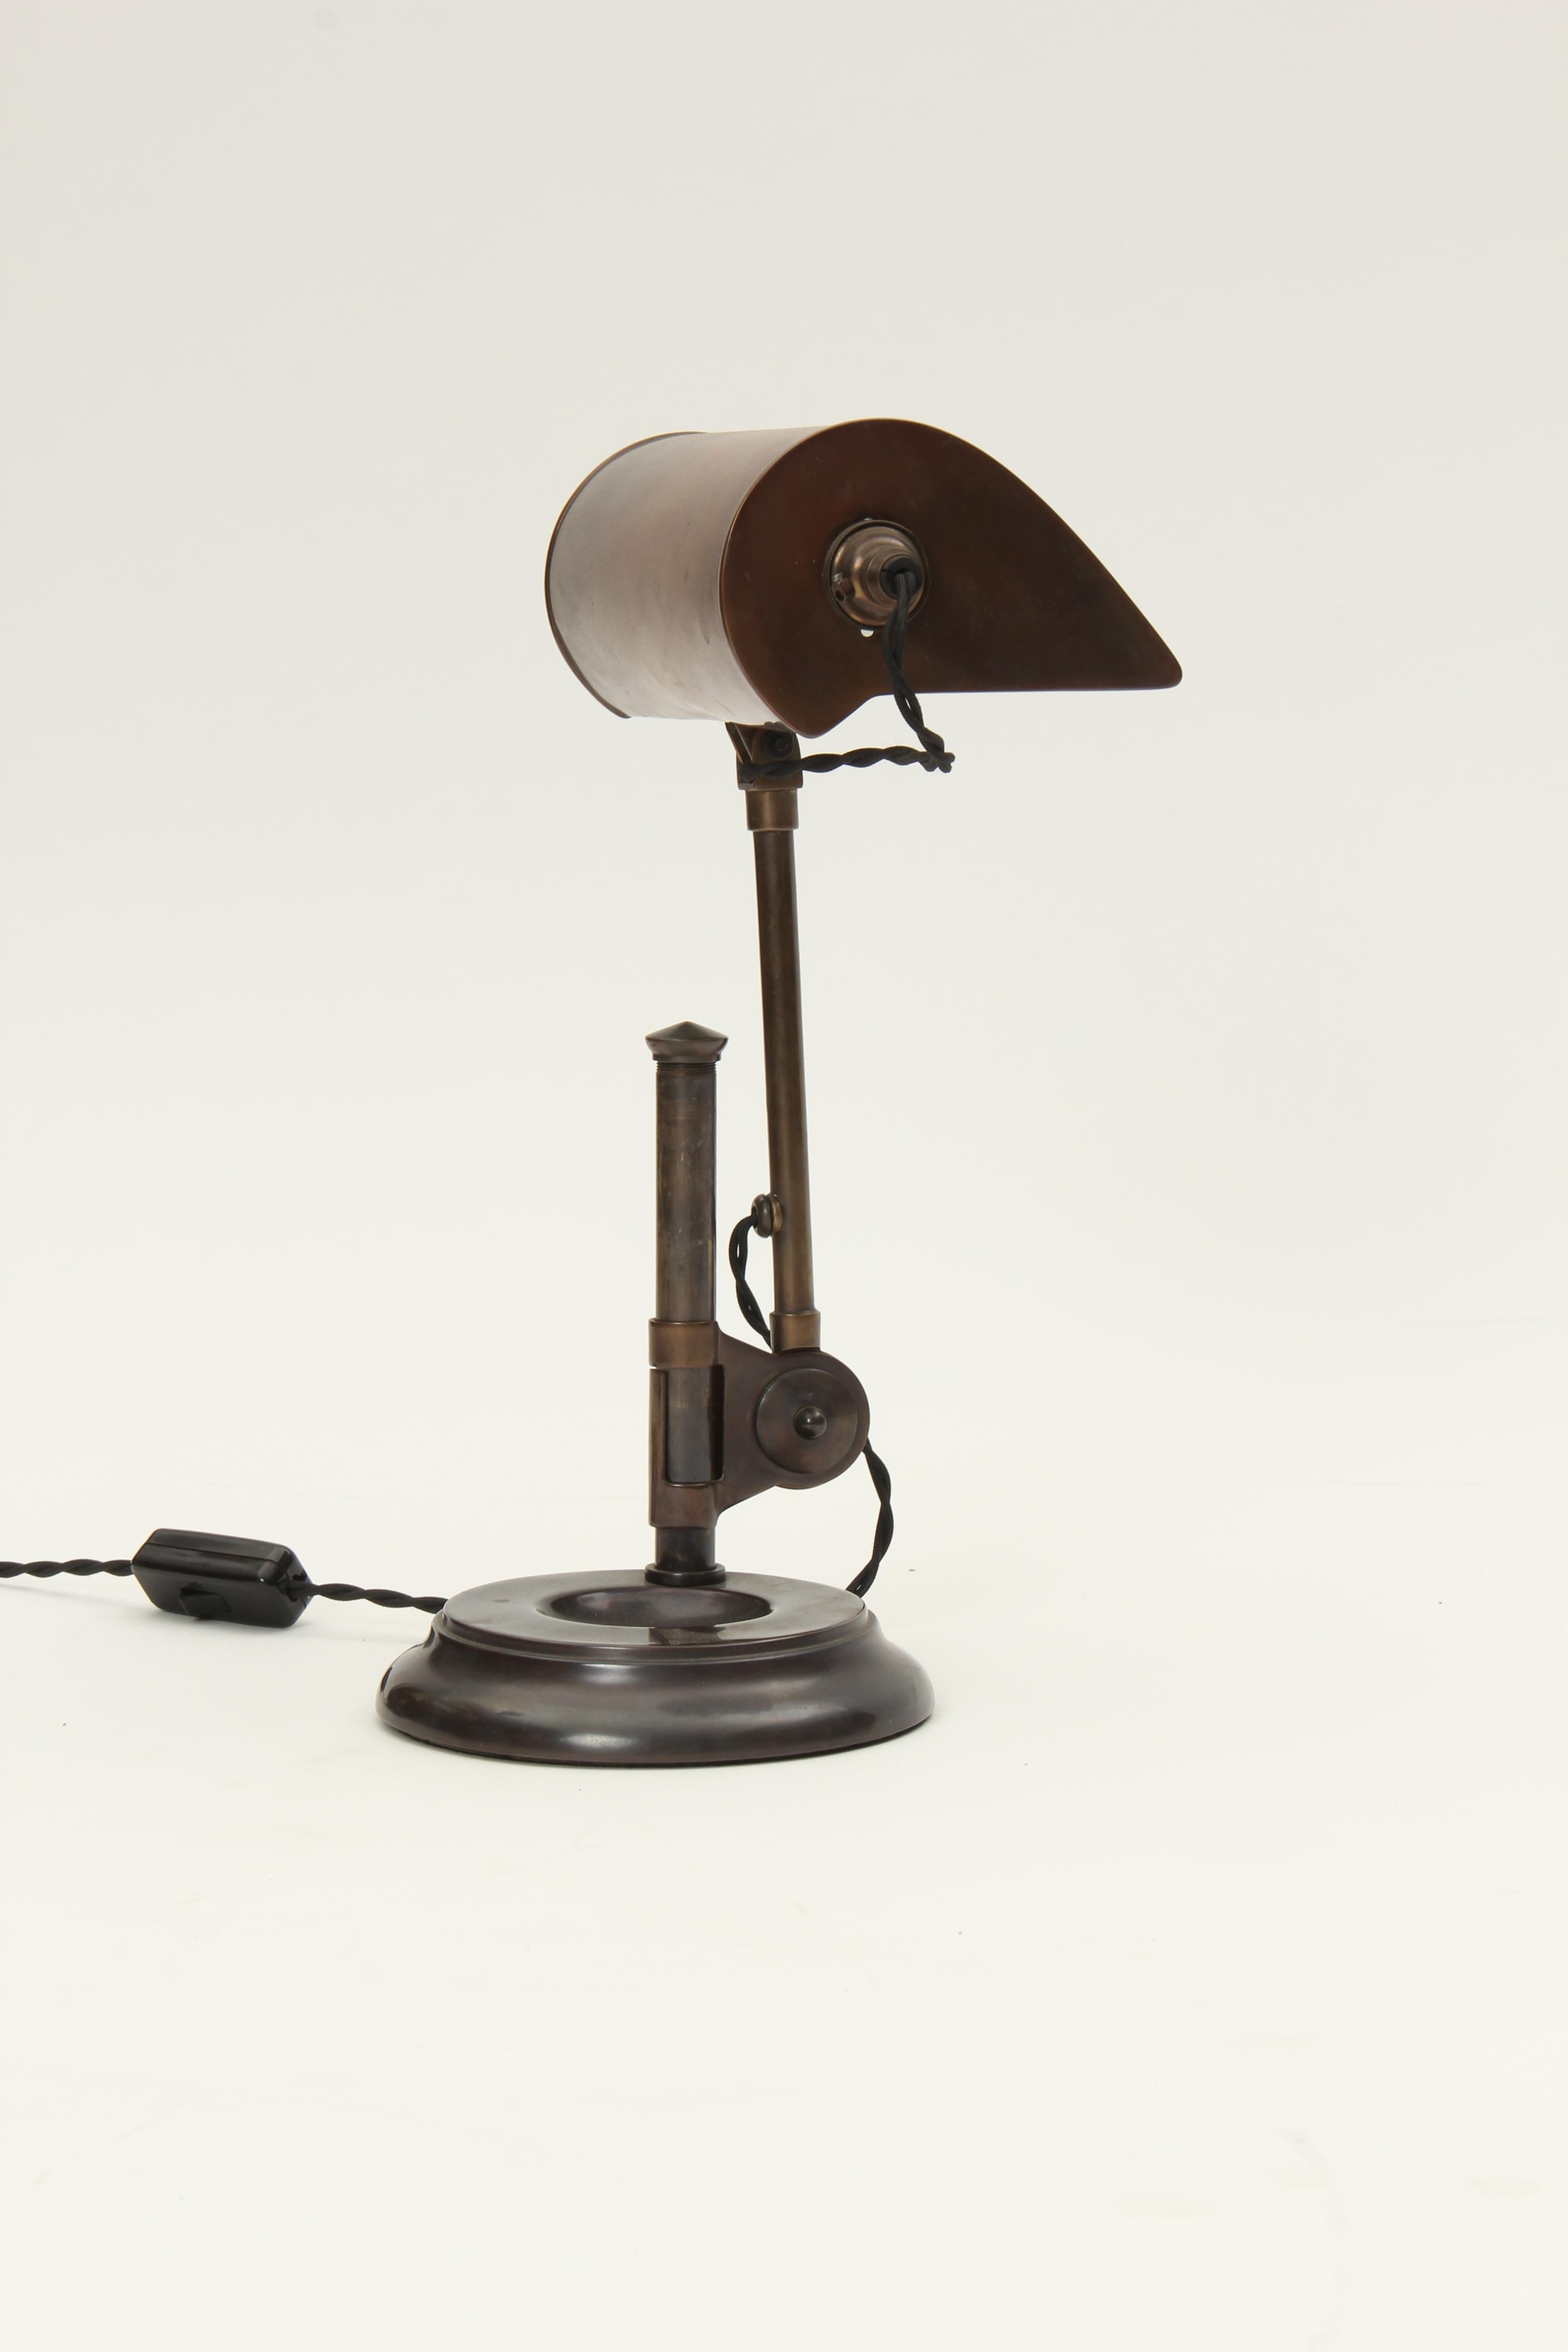 American Patinated Brass Pivoting Banker's Desk Lamp